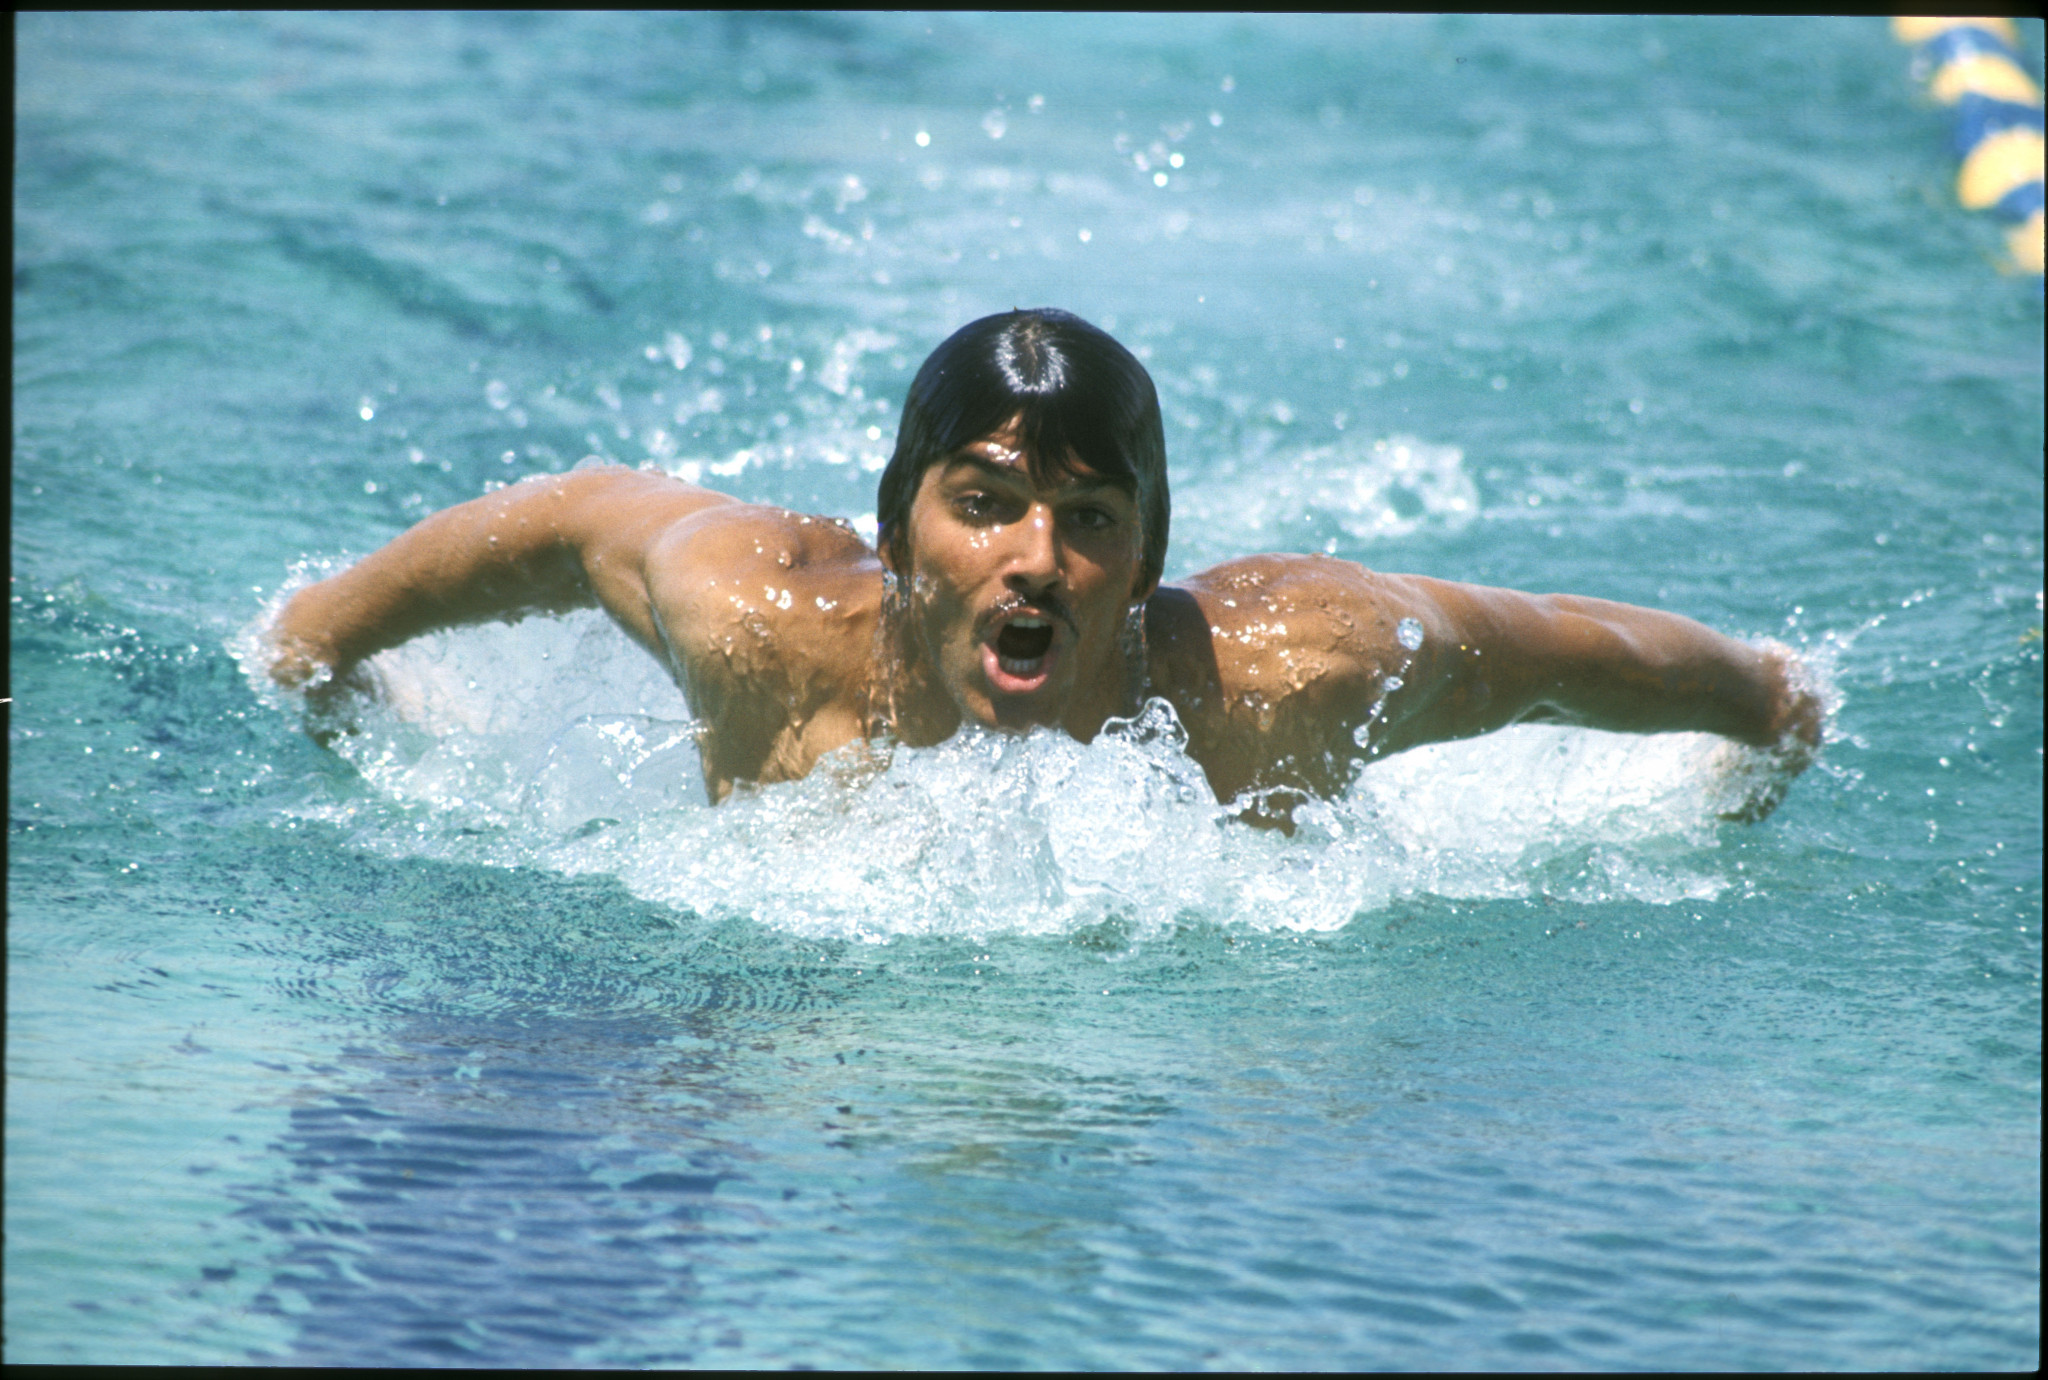 Seven golds for Mark Spitz, an achievement which was eclipsed by Michael Phelps in 2008  ©Laureus Sport for Good